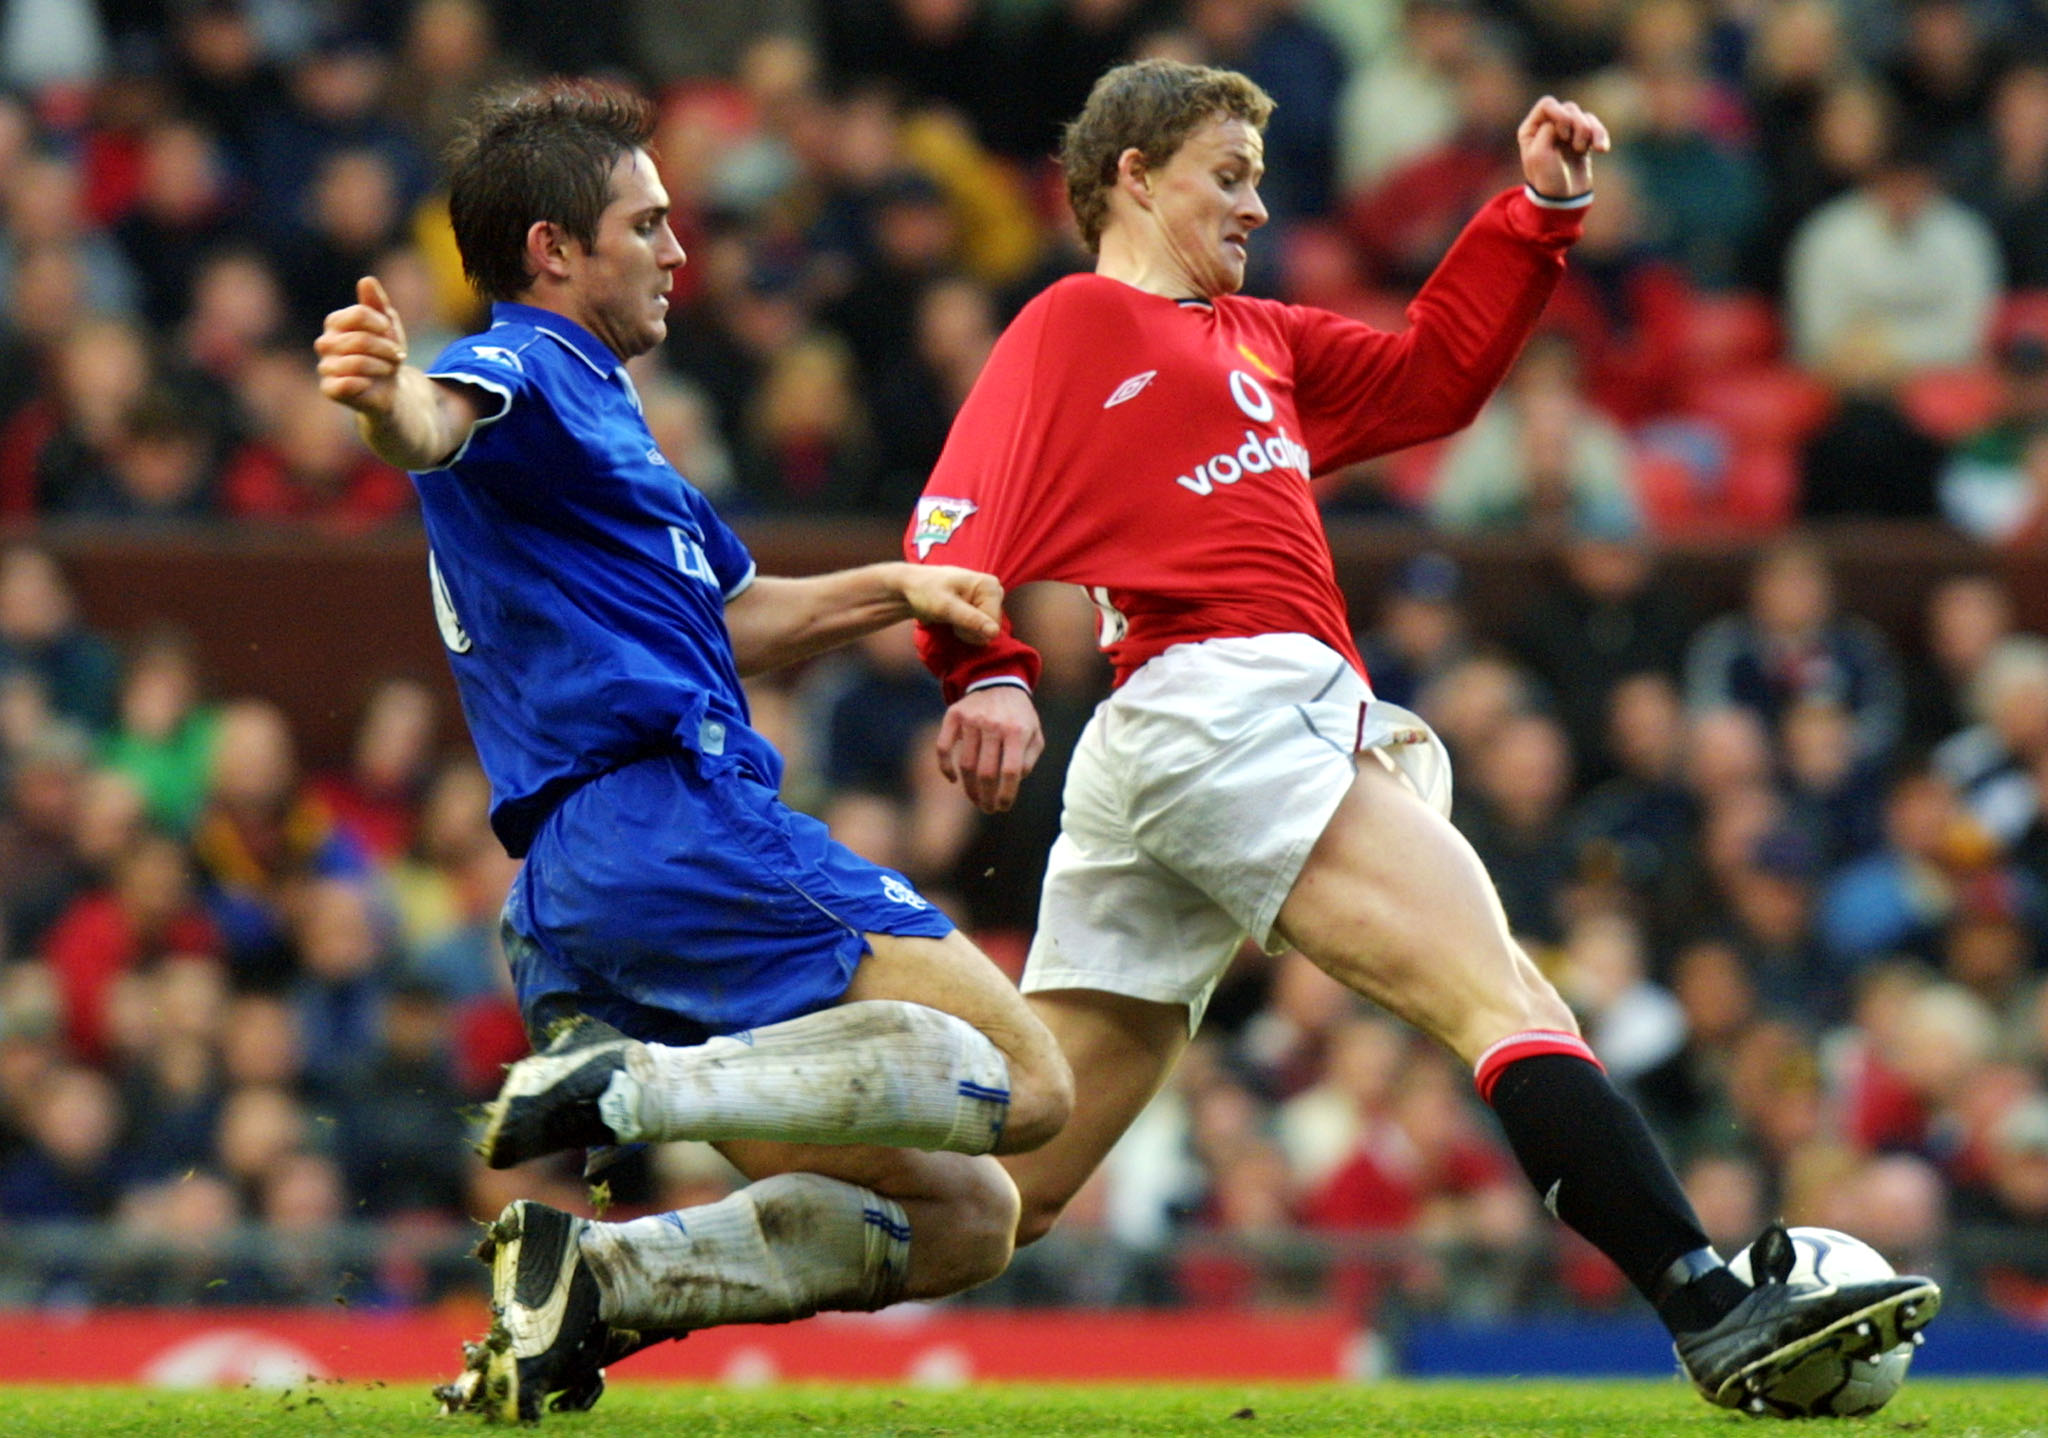 MANCHESTER, UNITED KINGDOM:  Chelsea's Frank Lampard (L) chases down Manchester United's Ole Gunnar Solskjaer (R) during the Premier League match at Old Trafford in Manchester 01December 2001. Chelsea won the match 3-0. AFP PHOTO Adrian DENNIS (Photo credit should read ADRIAN DENNIS/AFP/Getty Images)